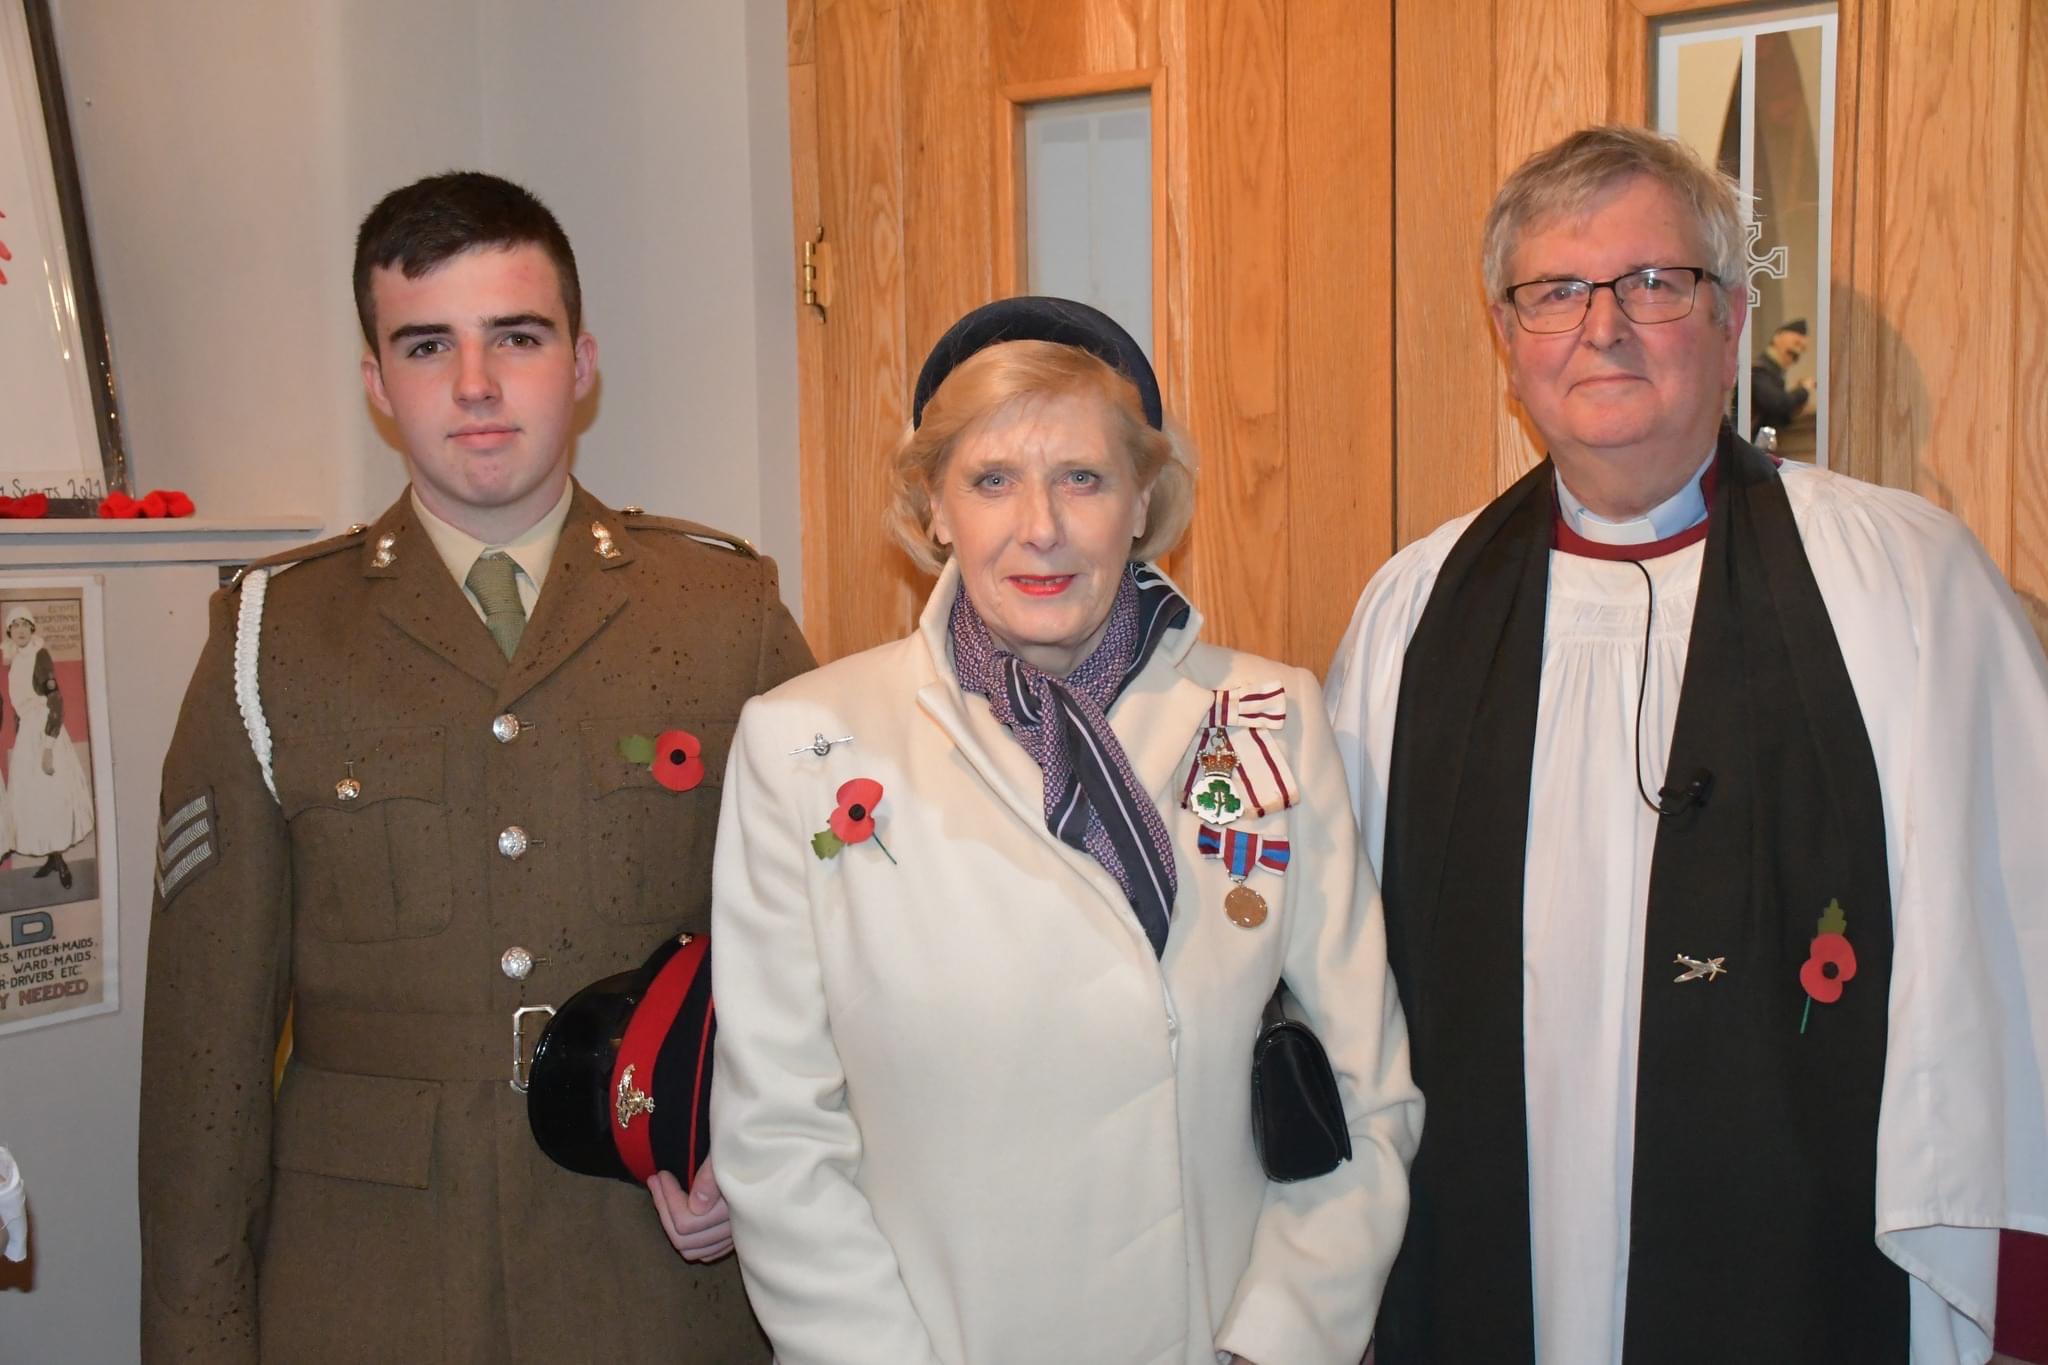 Cadet Chris Johnston with the Lord-Lieutenant and Canon Given.